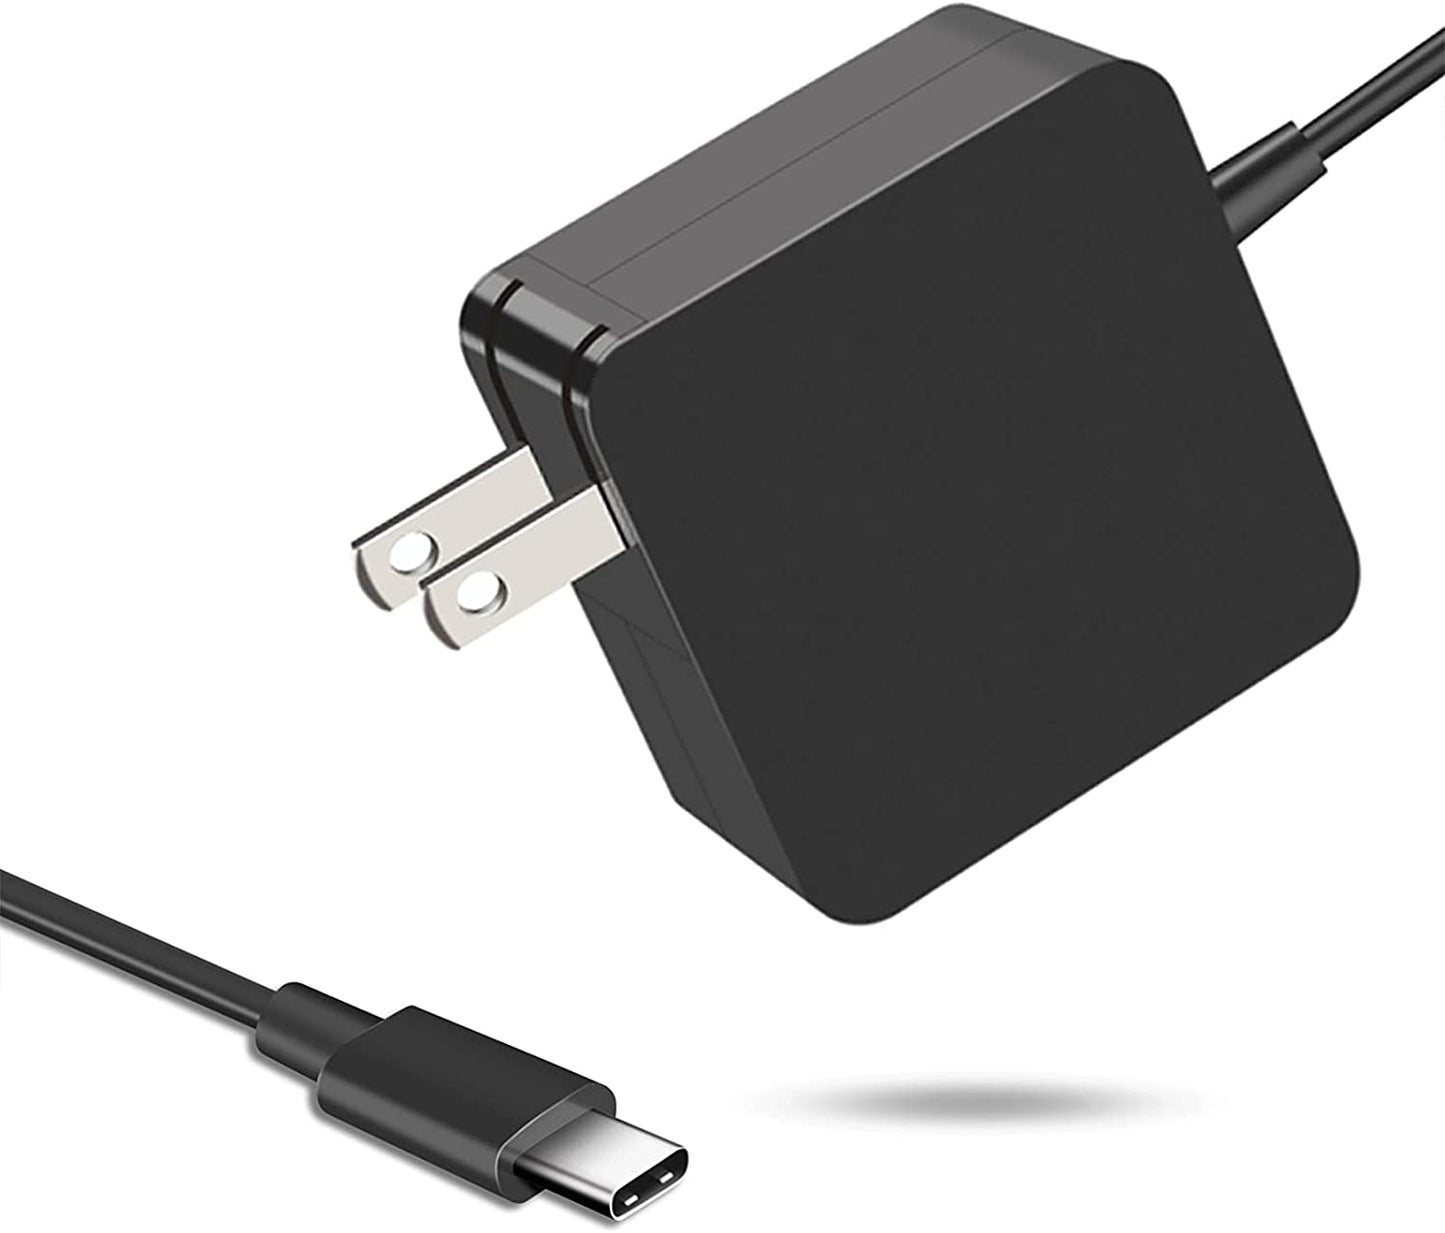 65W USB-C Wall Power Adapter for Notebooks and Cell Phones - LAA-P65UC